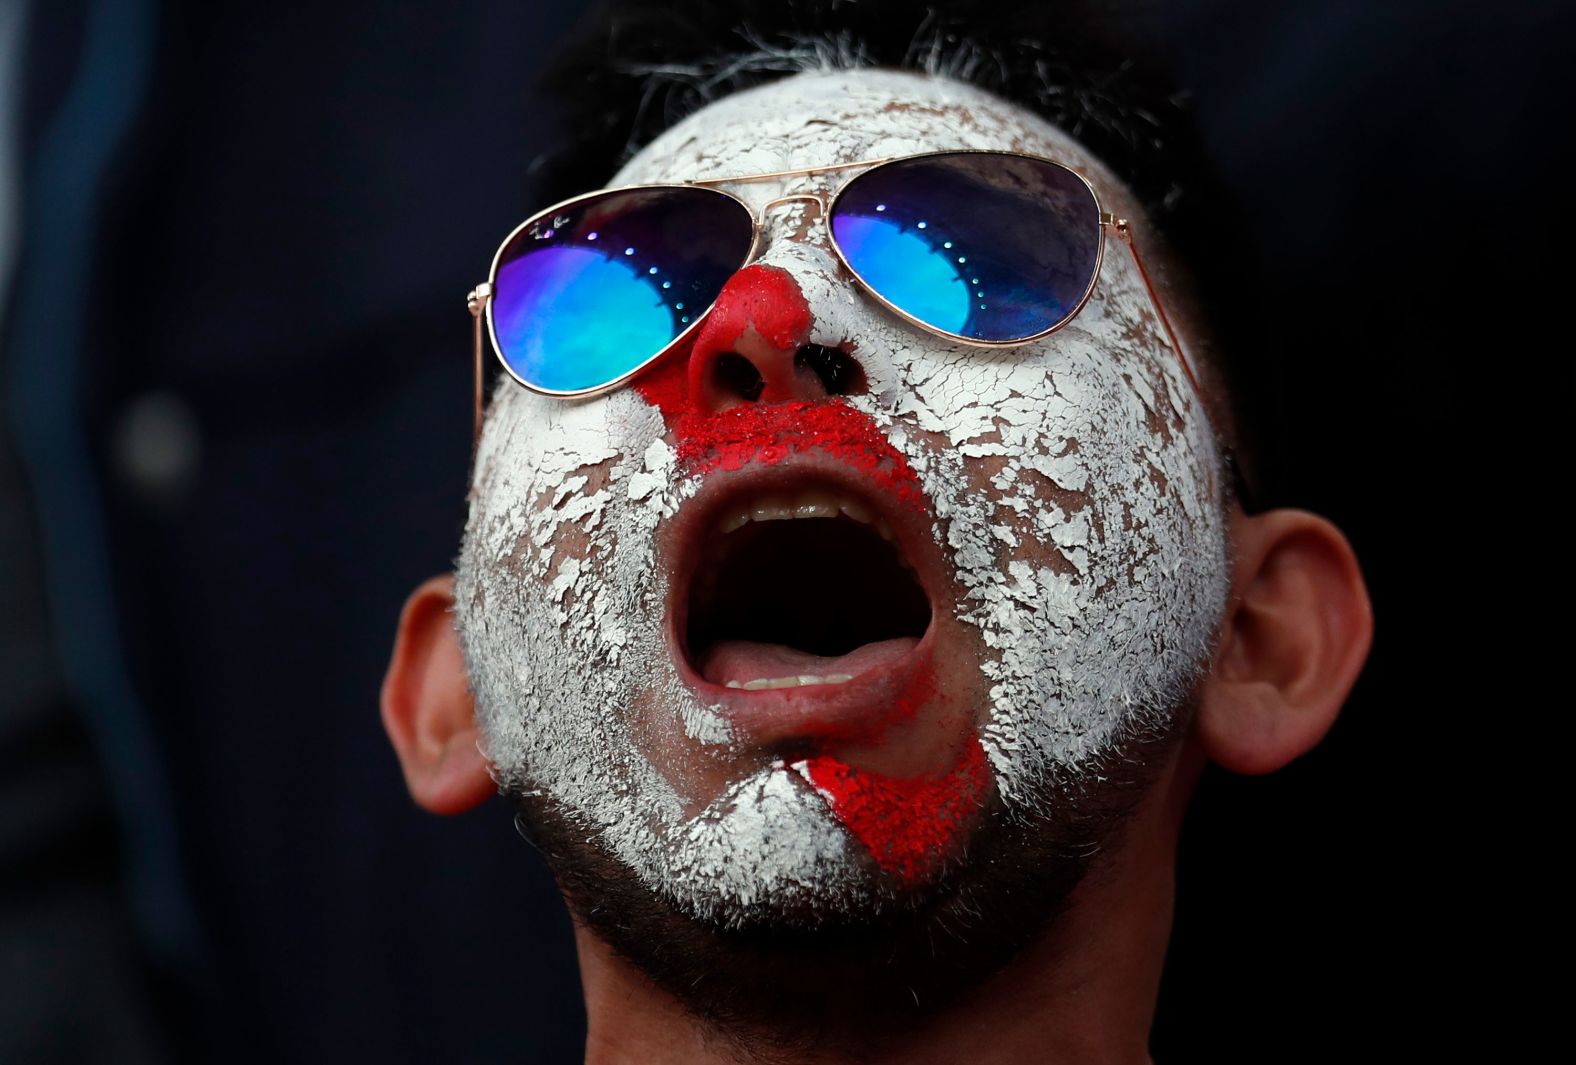 A Peruvian supporter waits for the start of the match.